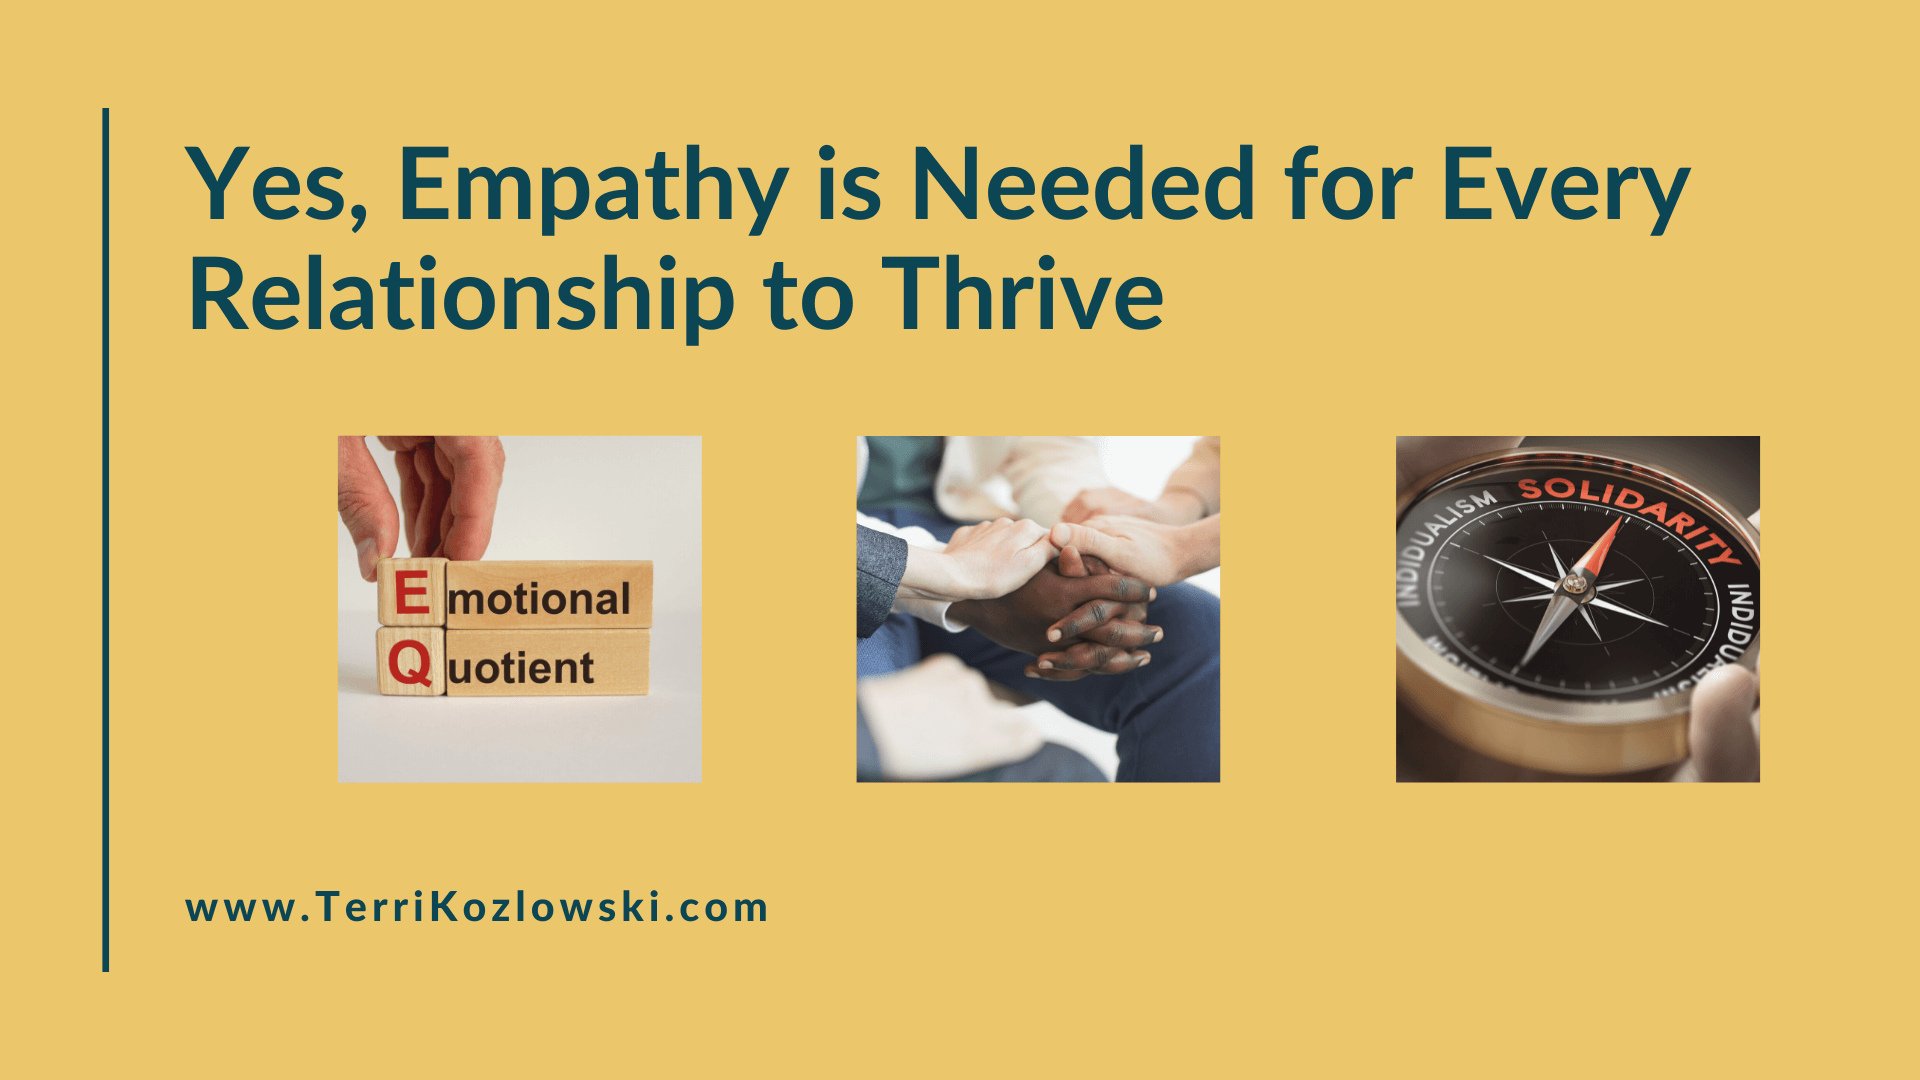 Relationships thrive with empathy